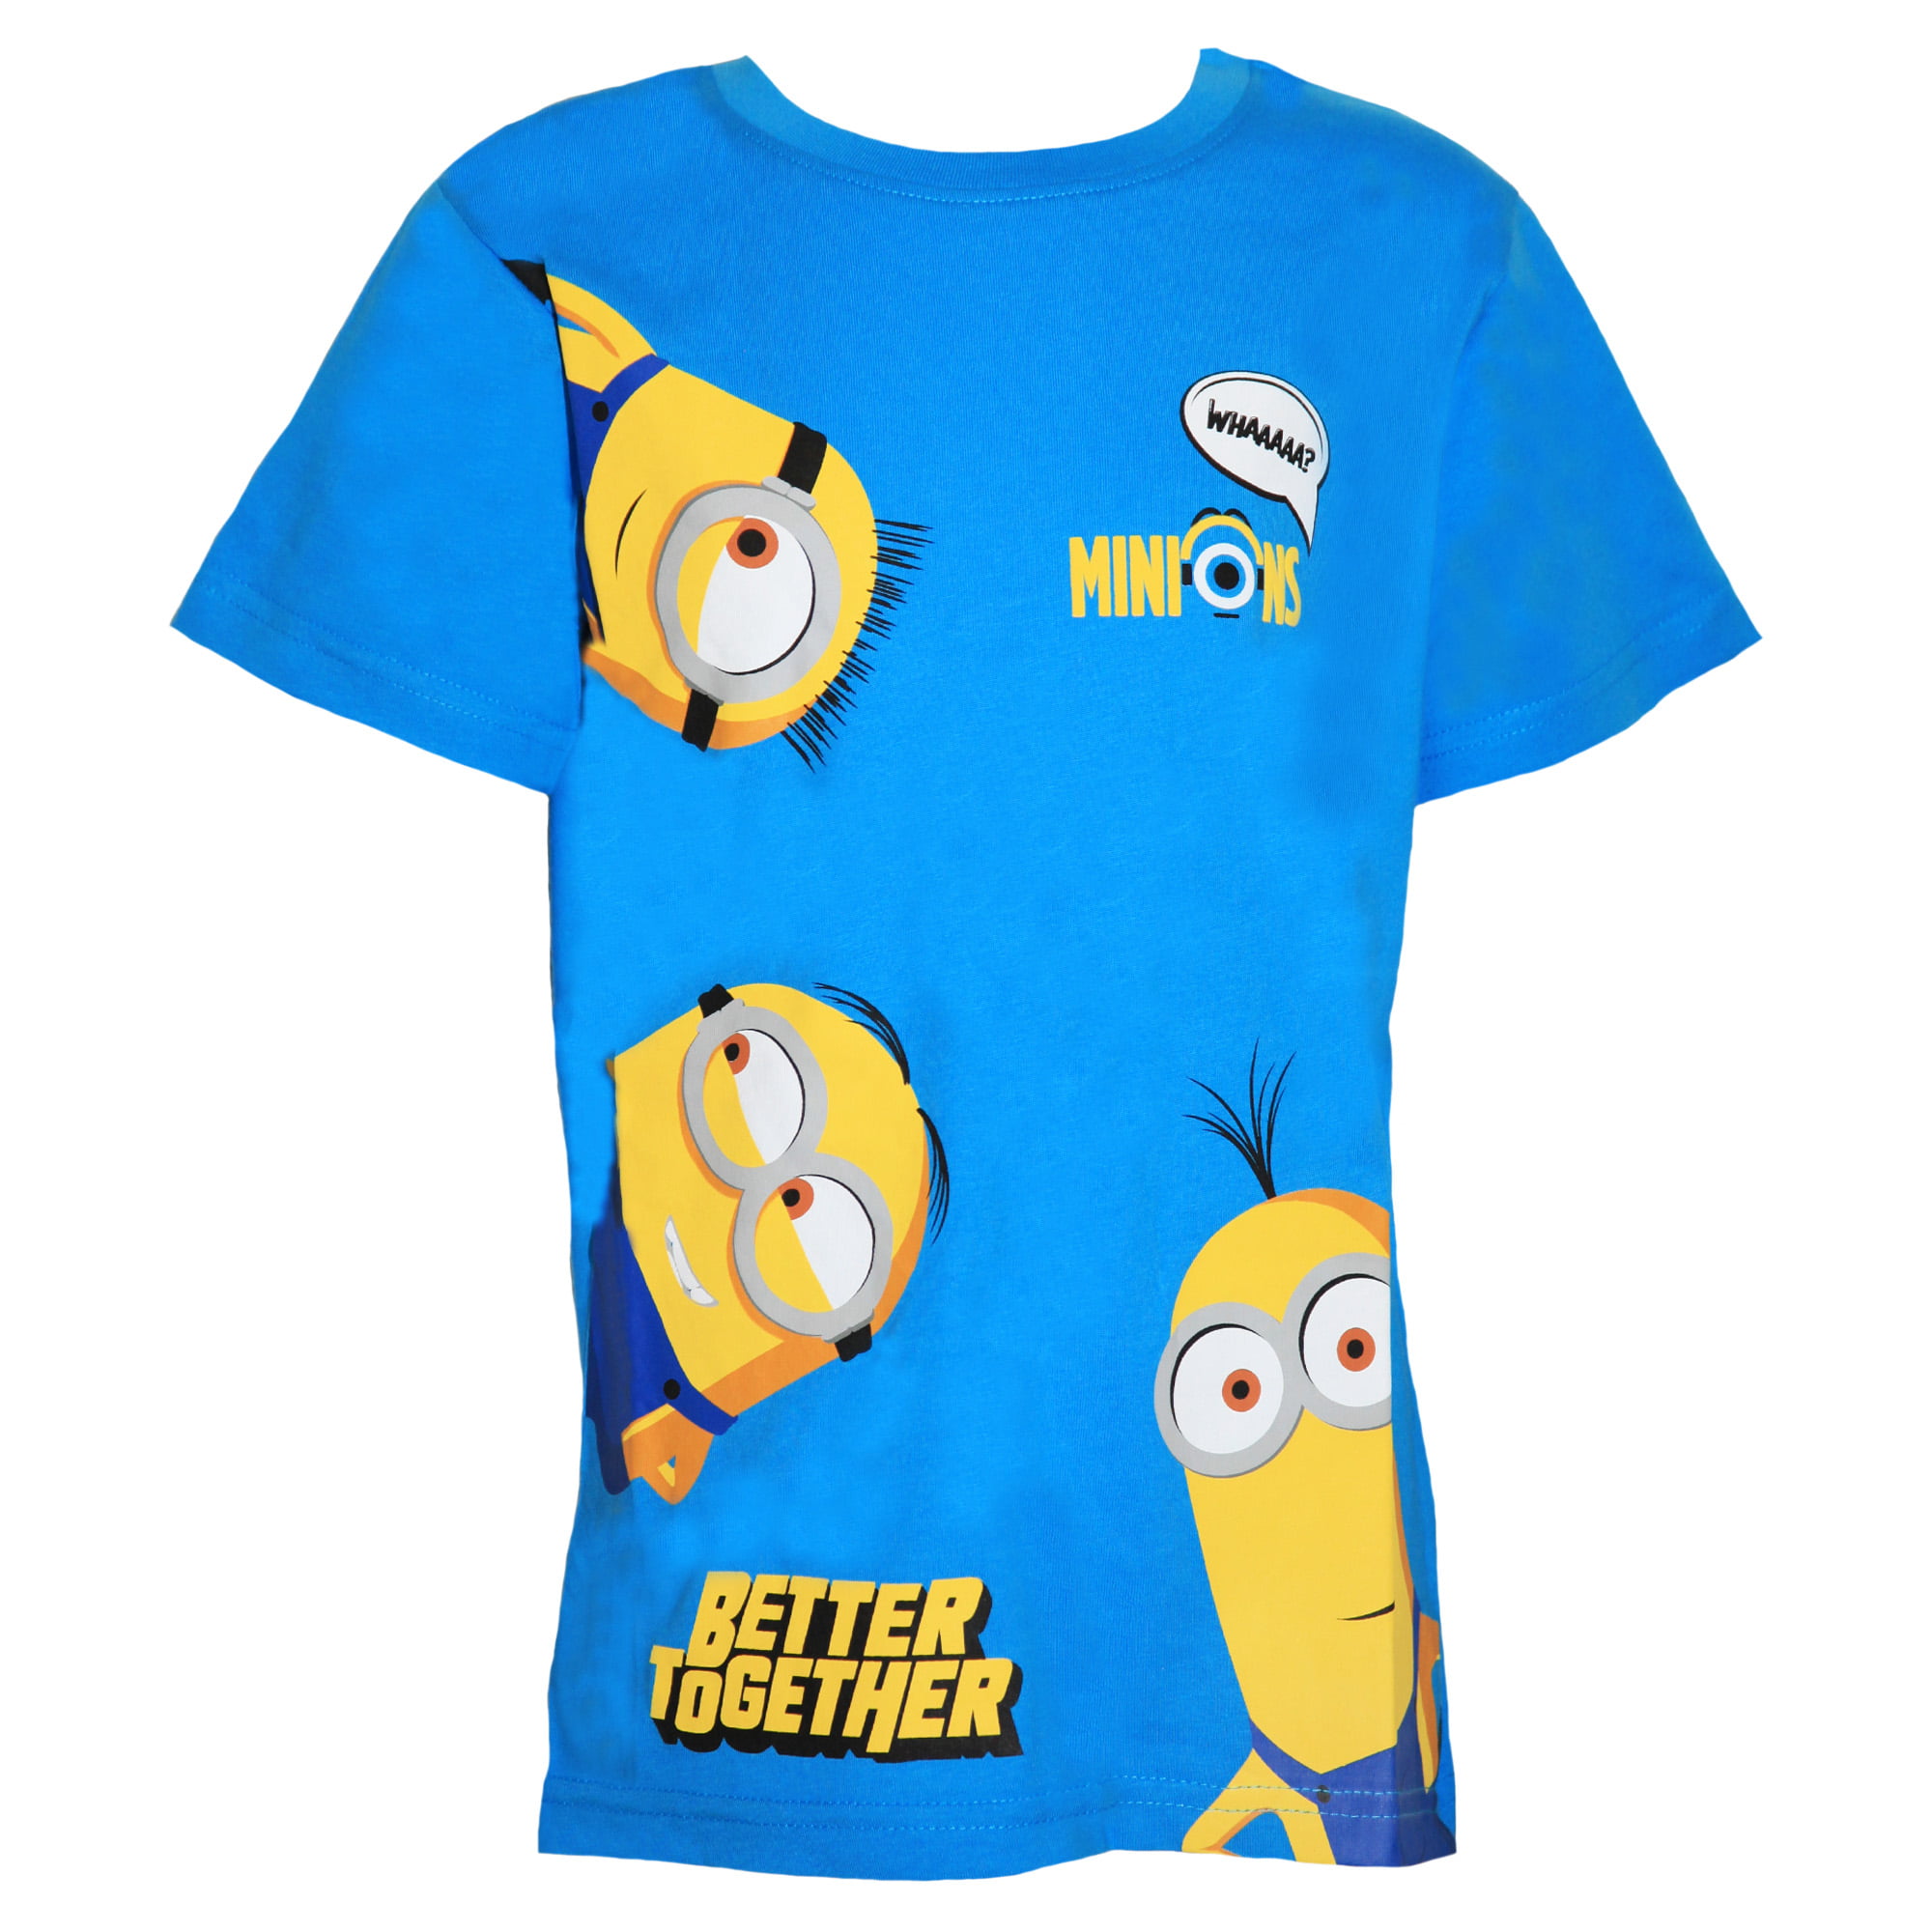 Boys New Minions Top Kids Short Sleeve Cotton Blue Jeans Look T-Shirt Age 3-10 Y 